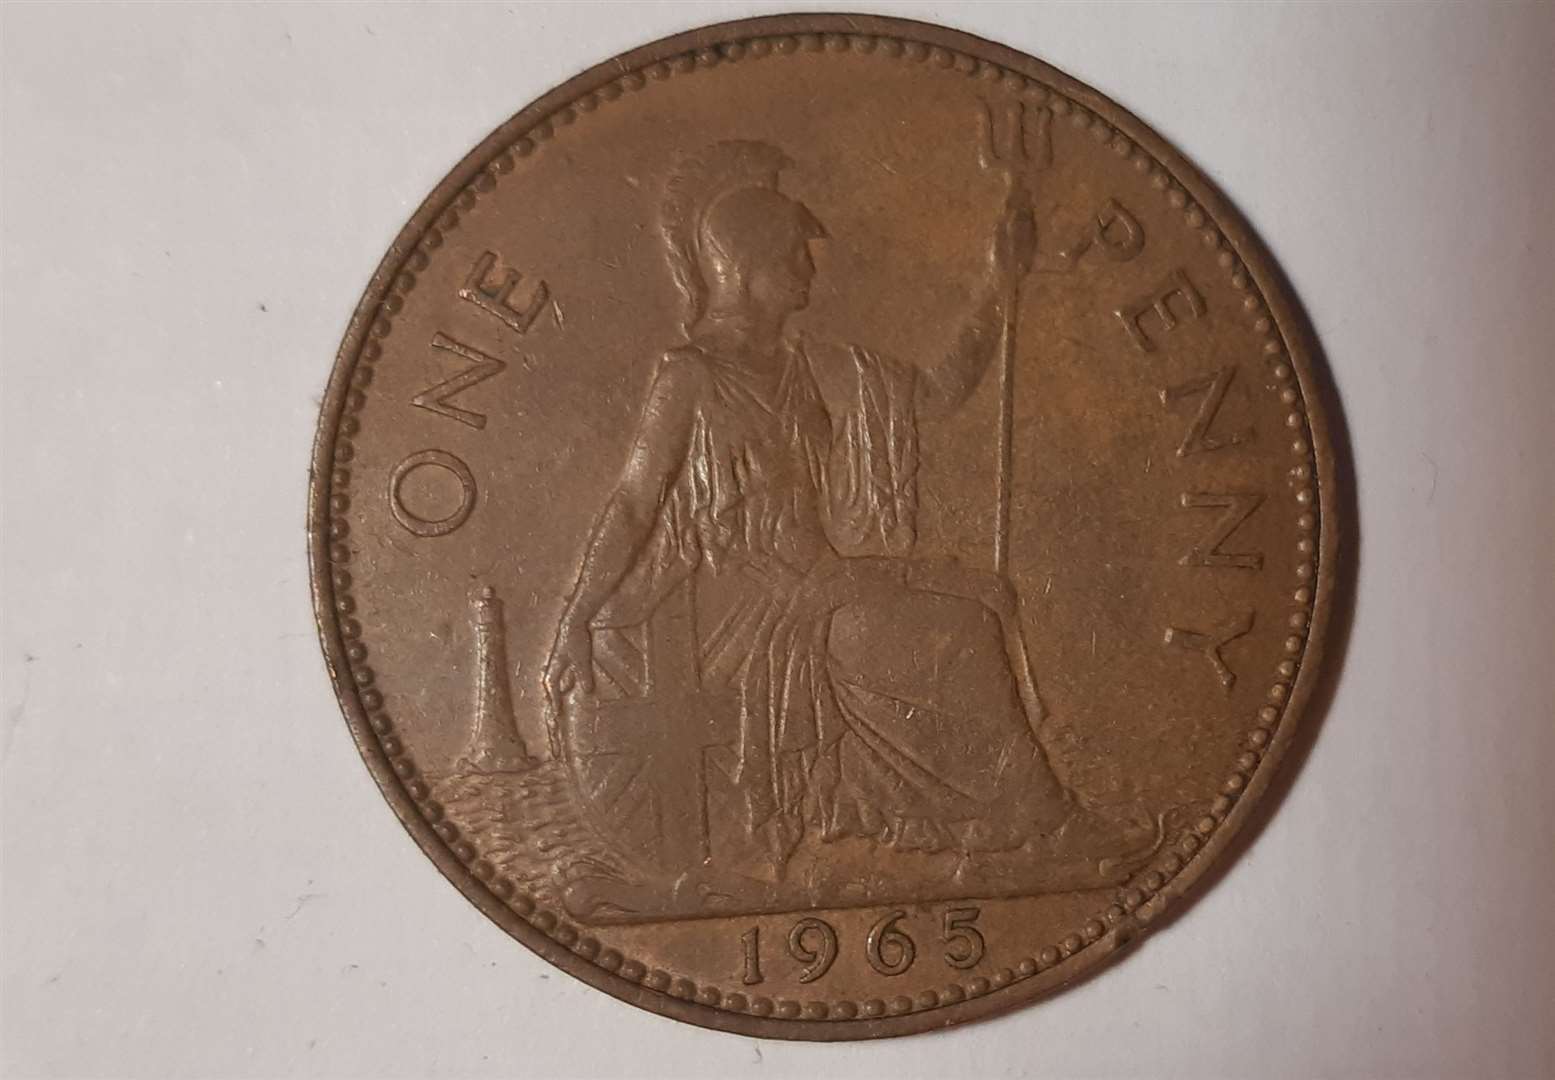 A 1965 old penny